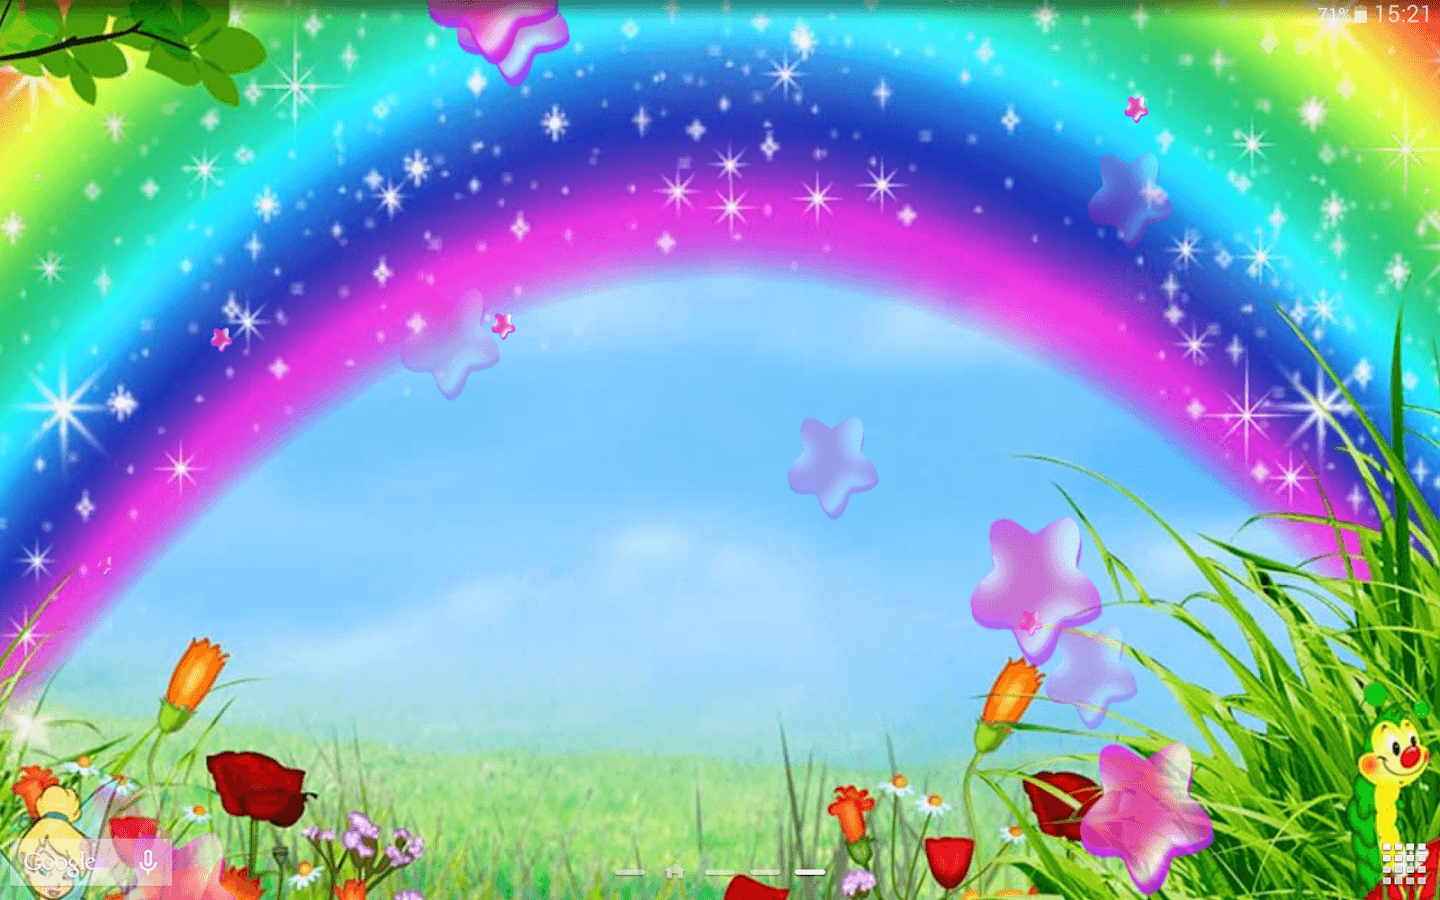 Pastel Rainbow Images  Free Photos PNG Stickers Wallpapers  Backgrounds   rawpixel